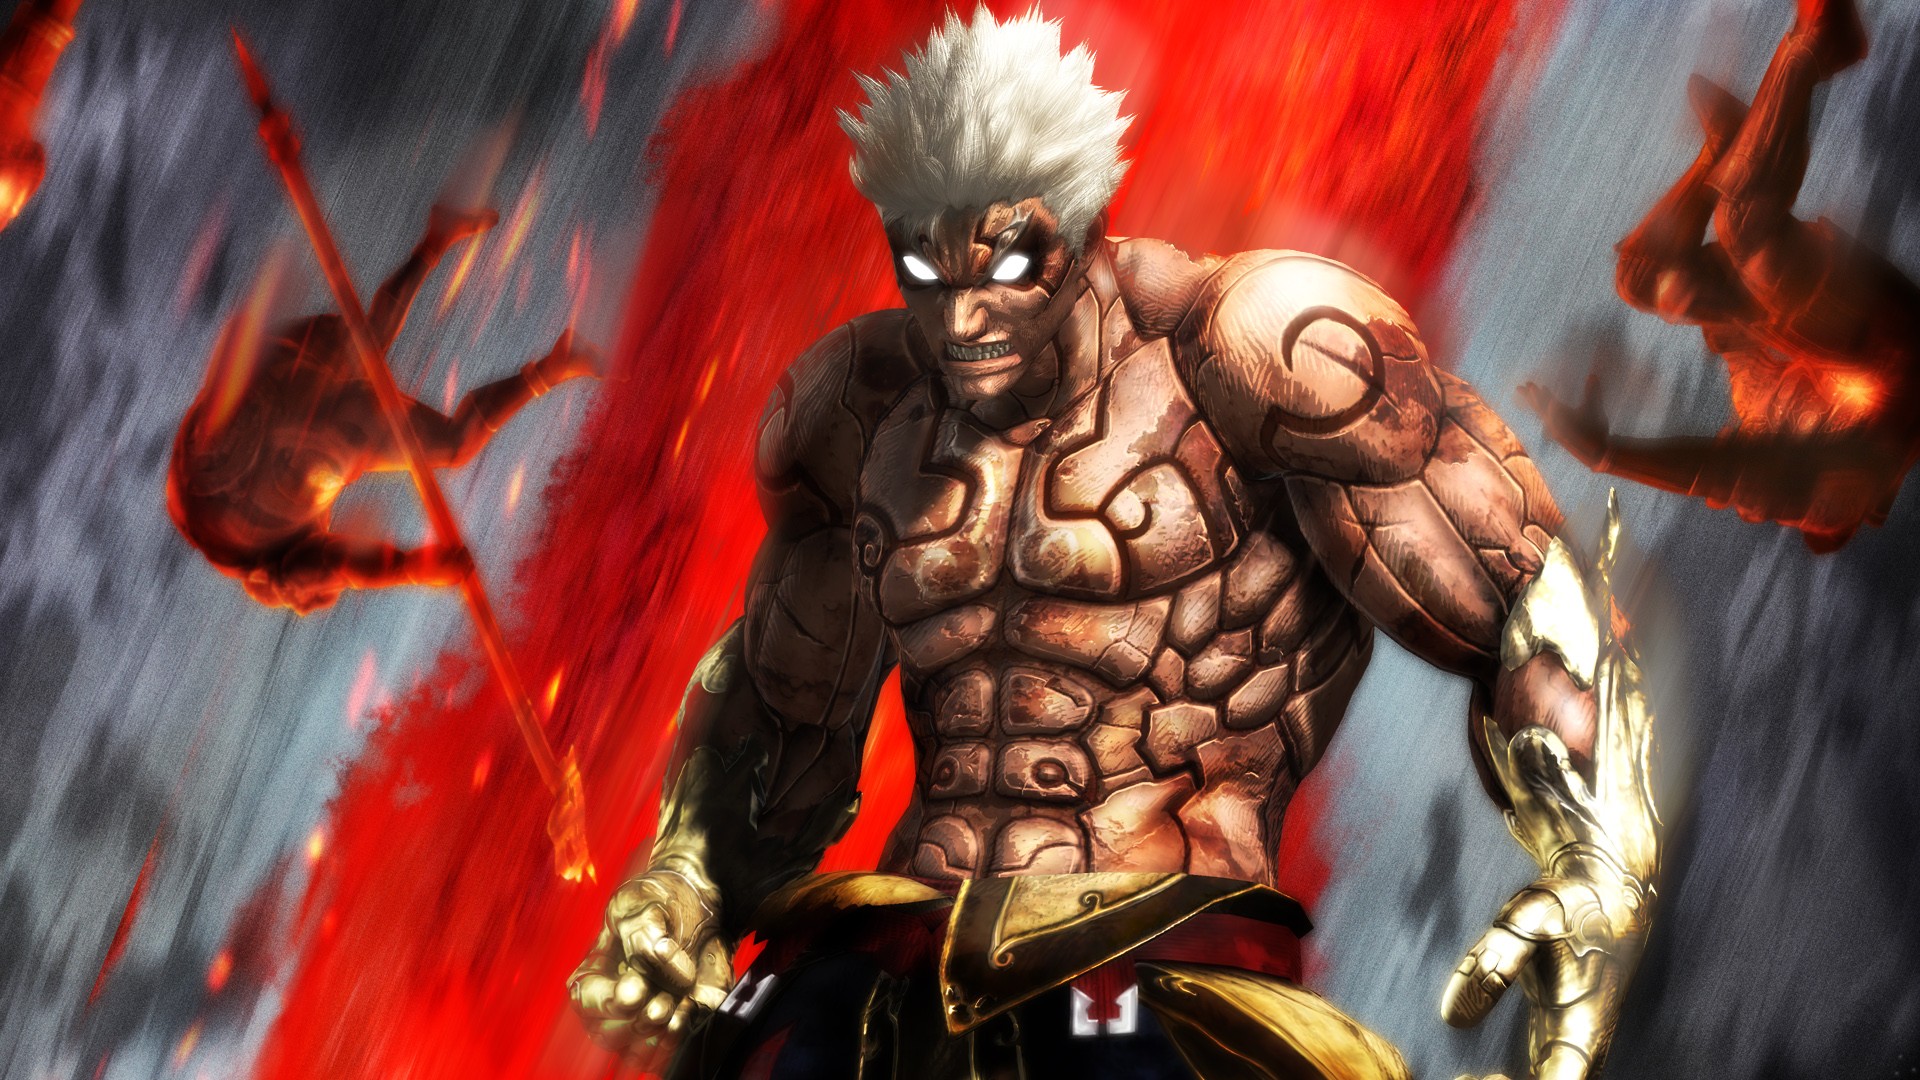 14 Asuras Wrath HD Wallpapers Backgrounds - Wallpaper Abyss